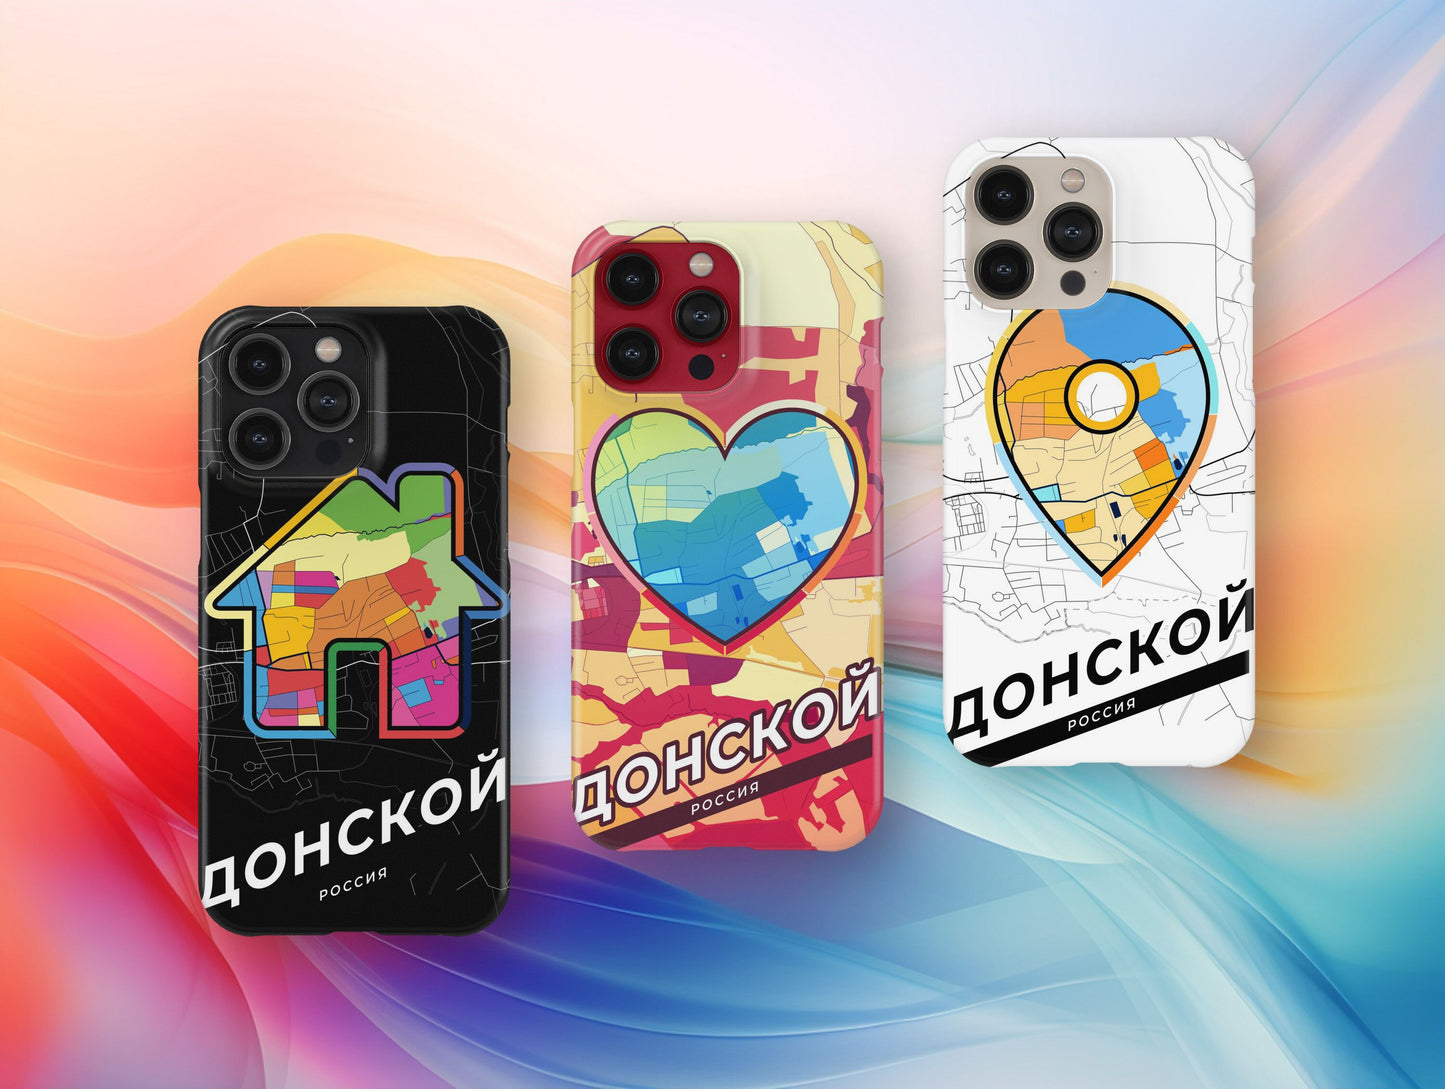 Donskoy Russia slim phone case with colorful icon. Birthday, wedding or housewarming gift. Couple match cases.